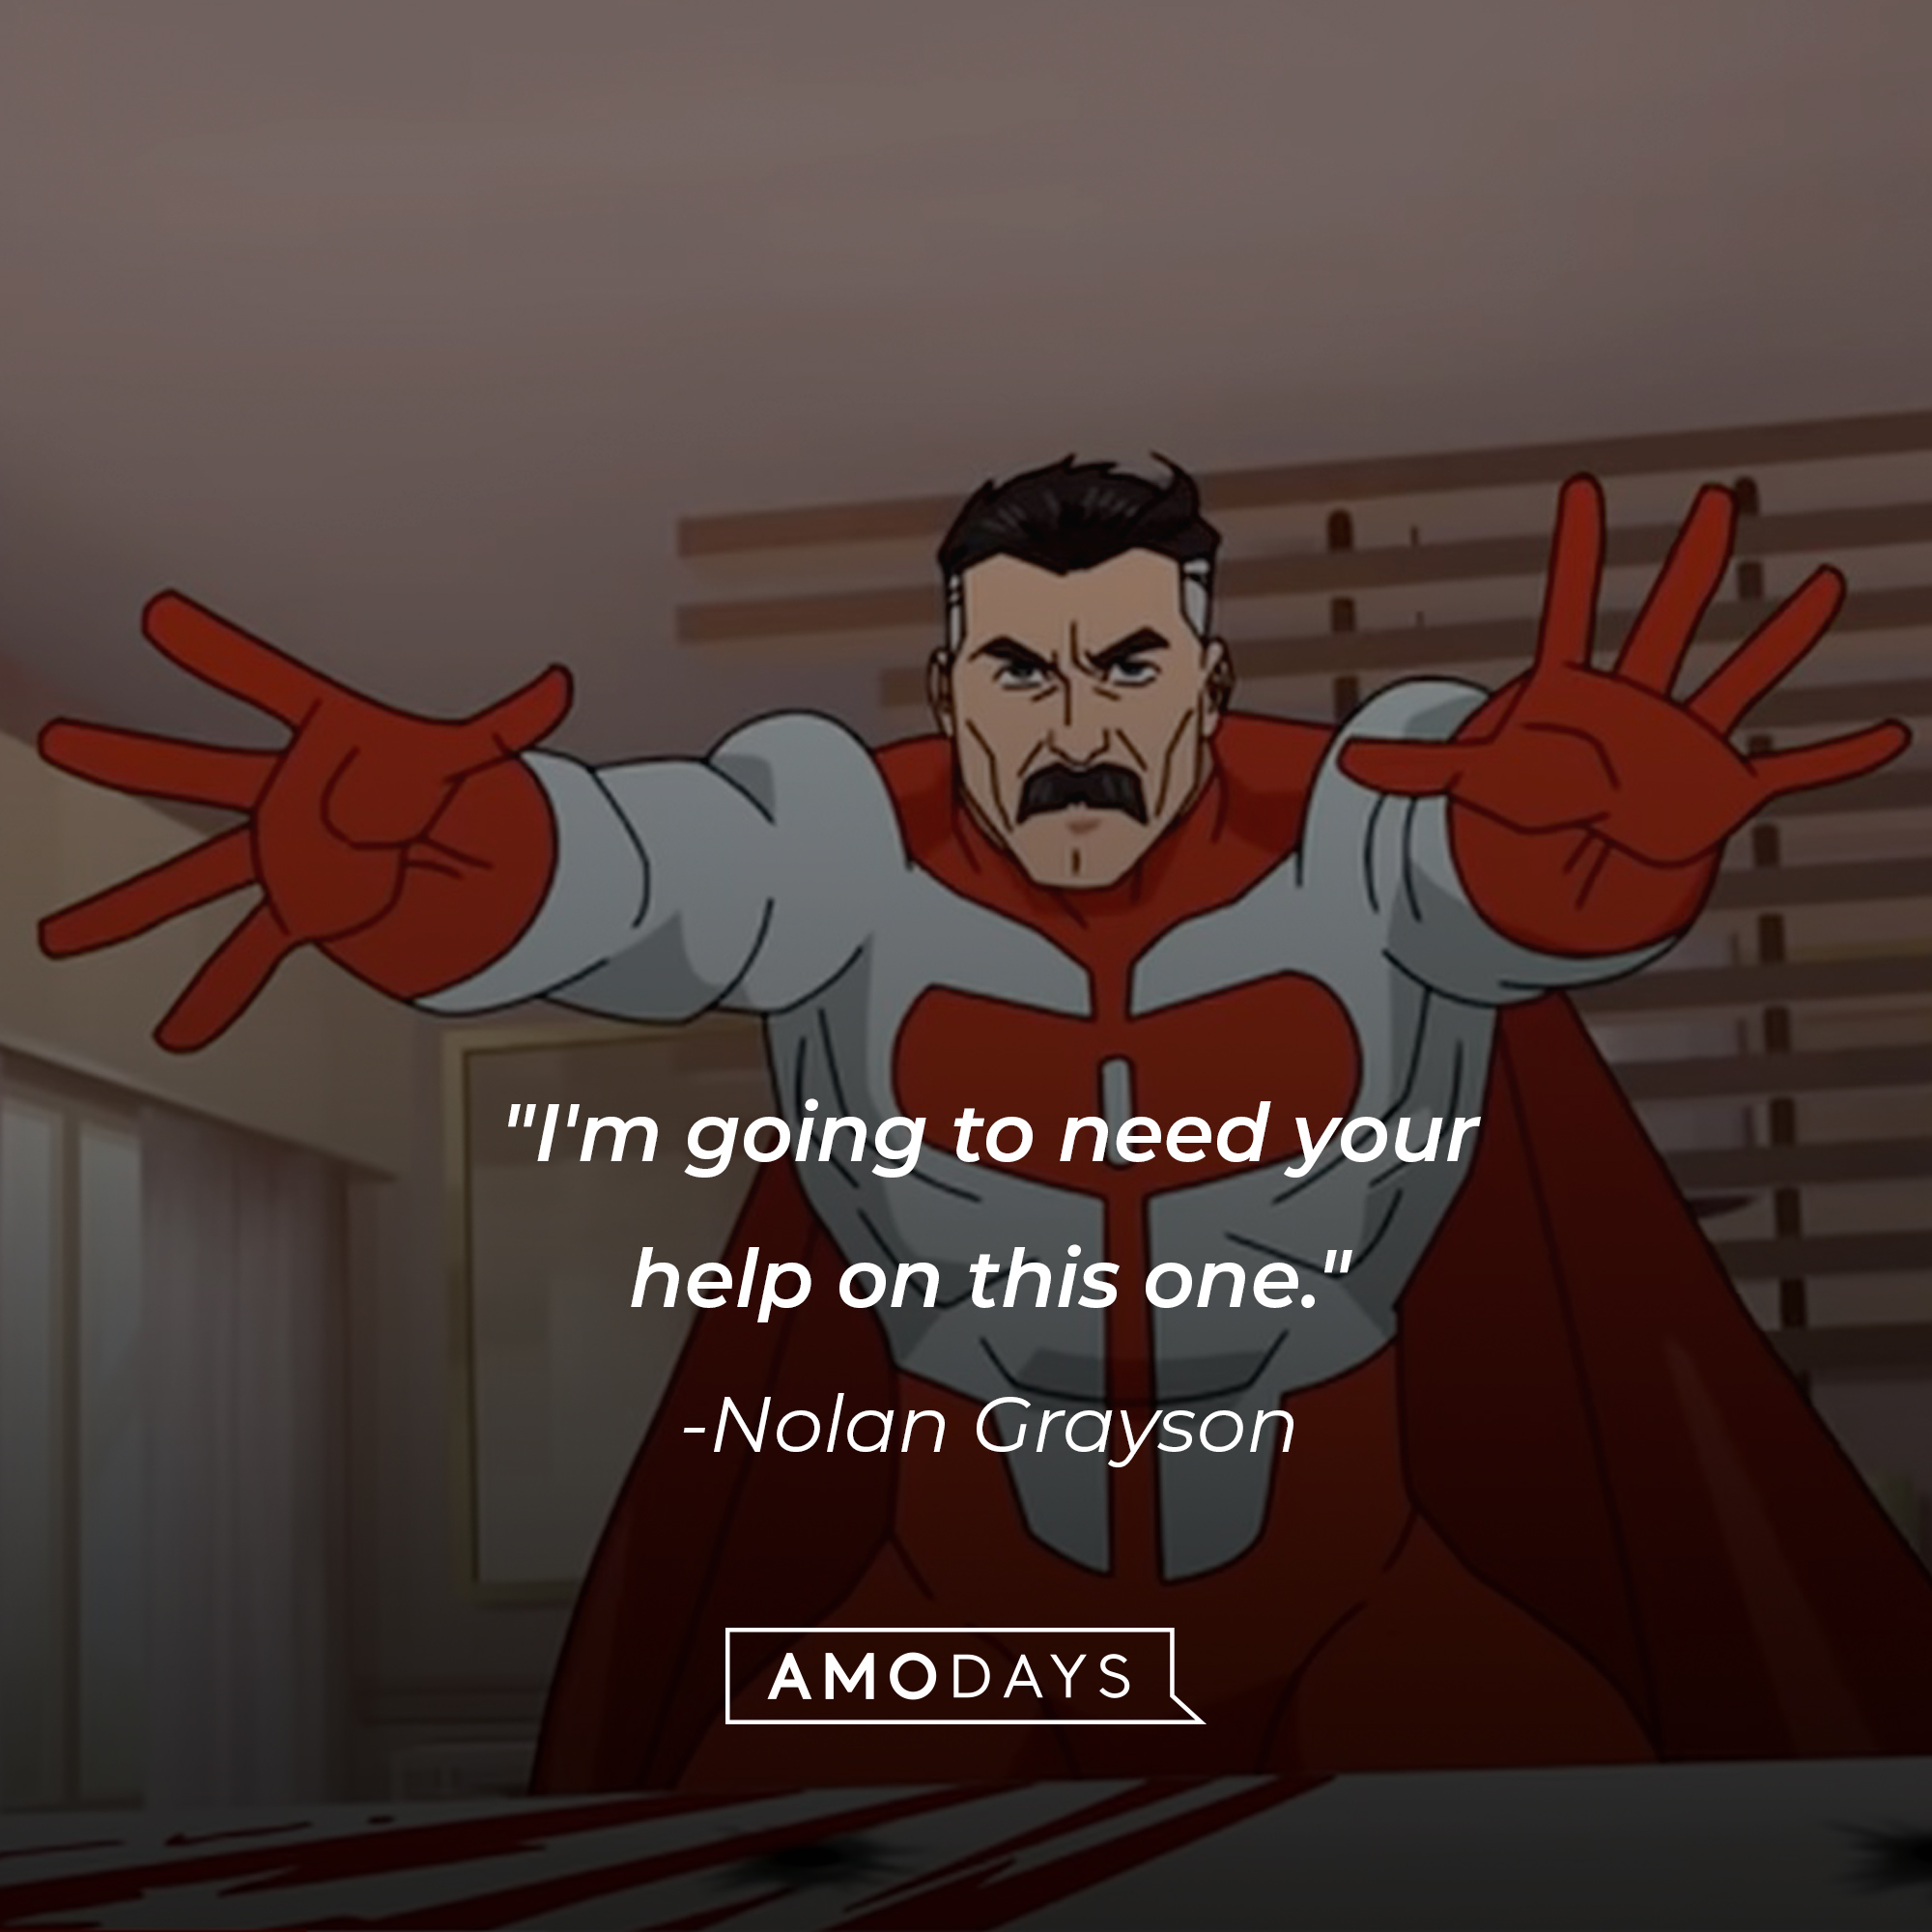 Nolan Grayson's quote: "I'm going to need your help on this one." | Source: Facebook.com/Invincibleuniverse